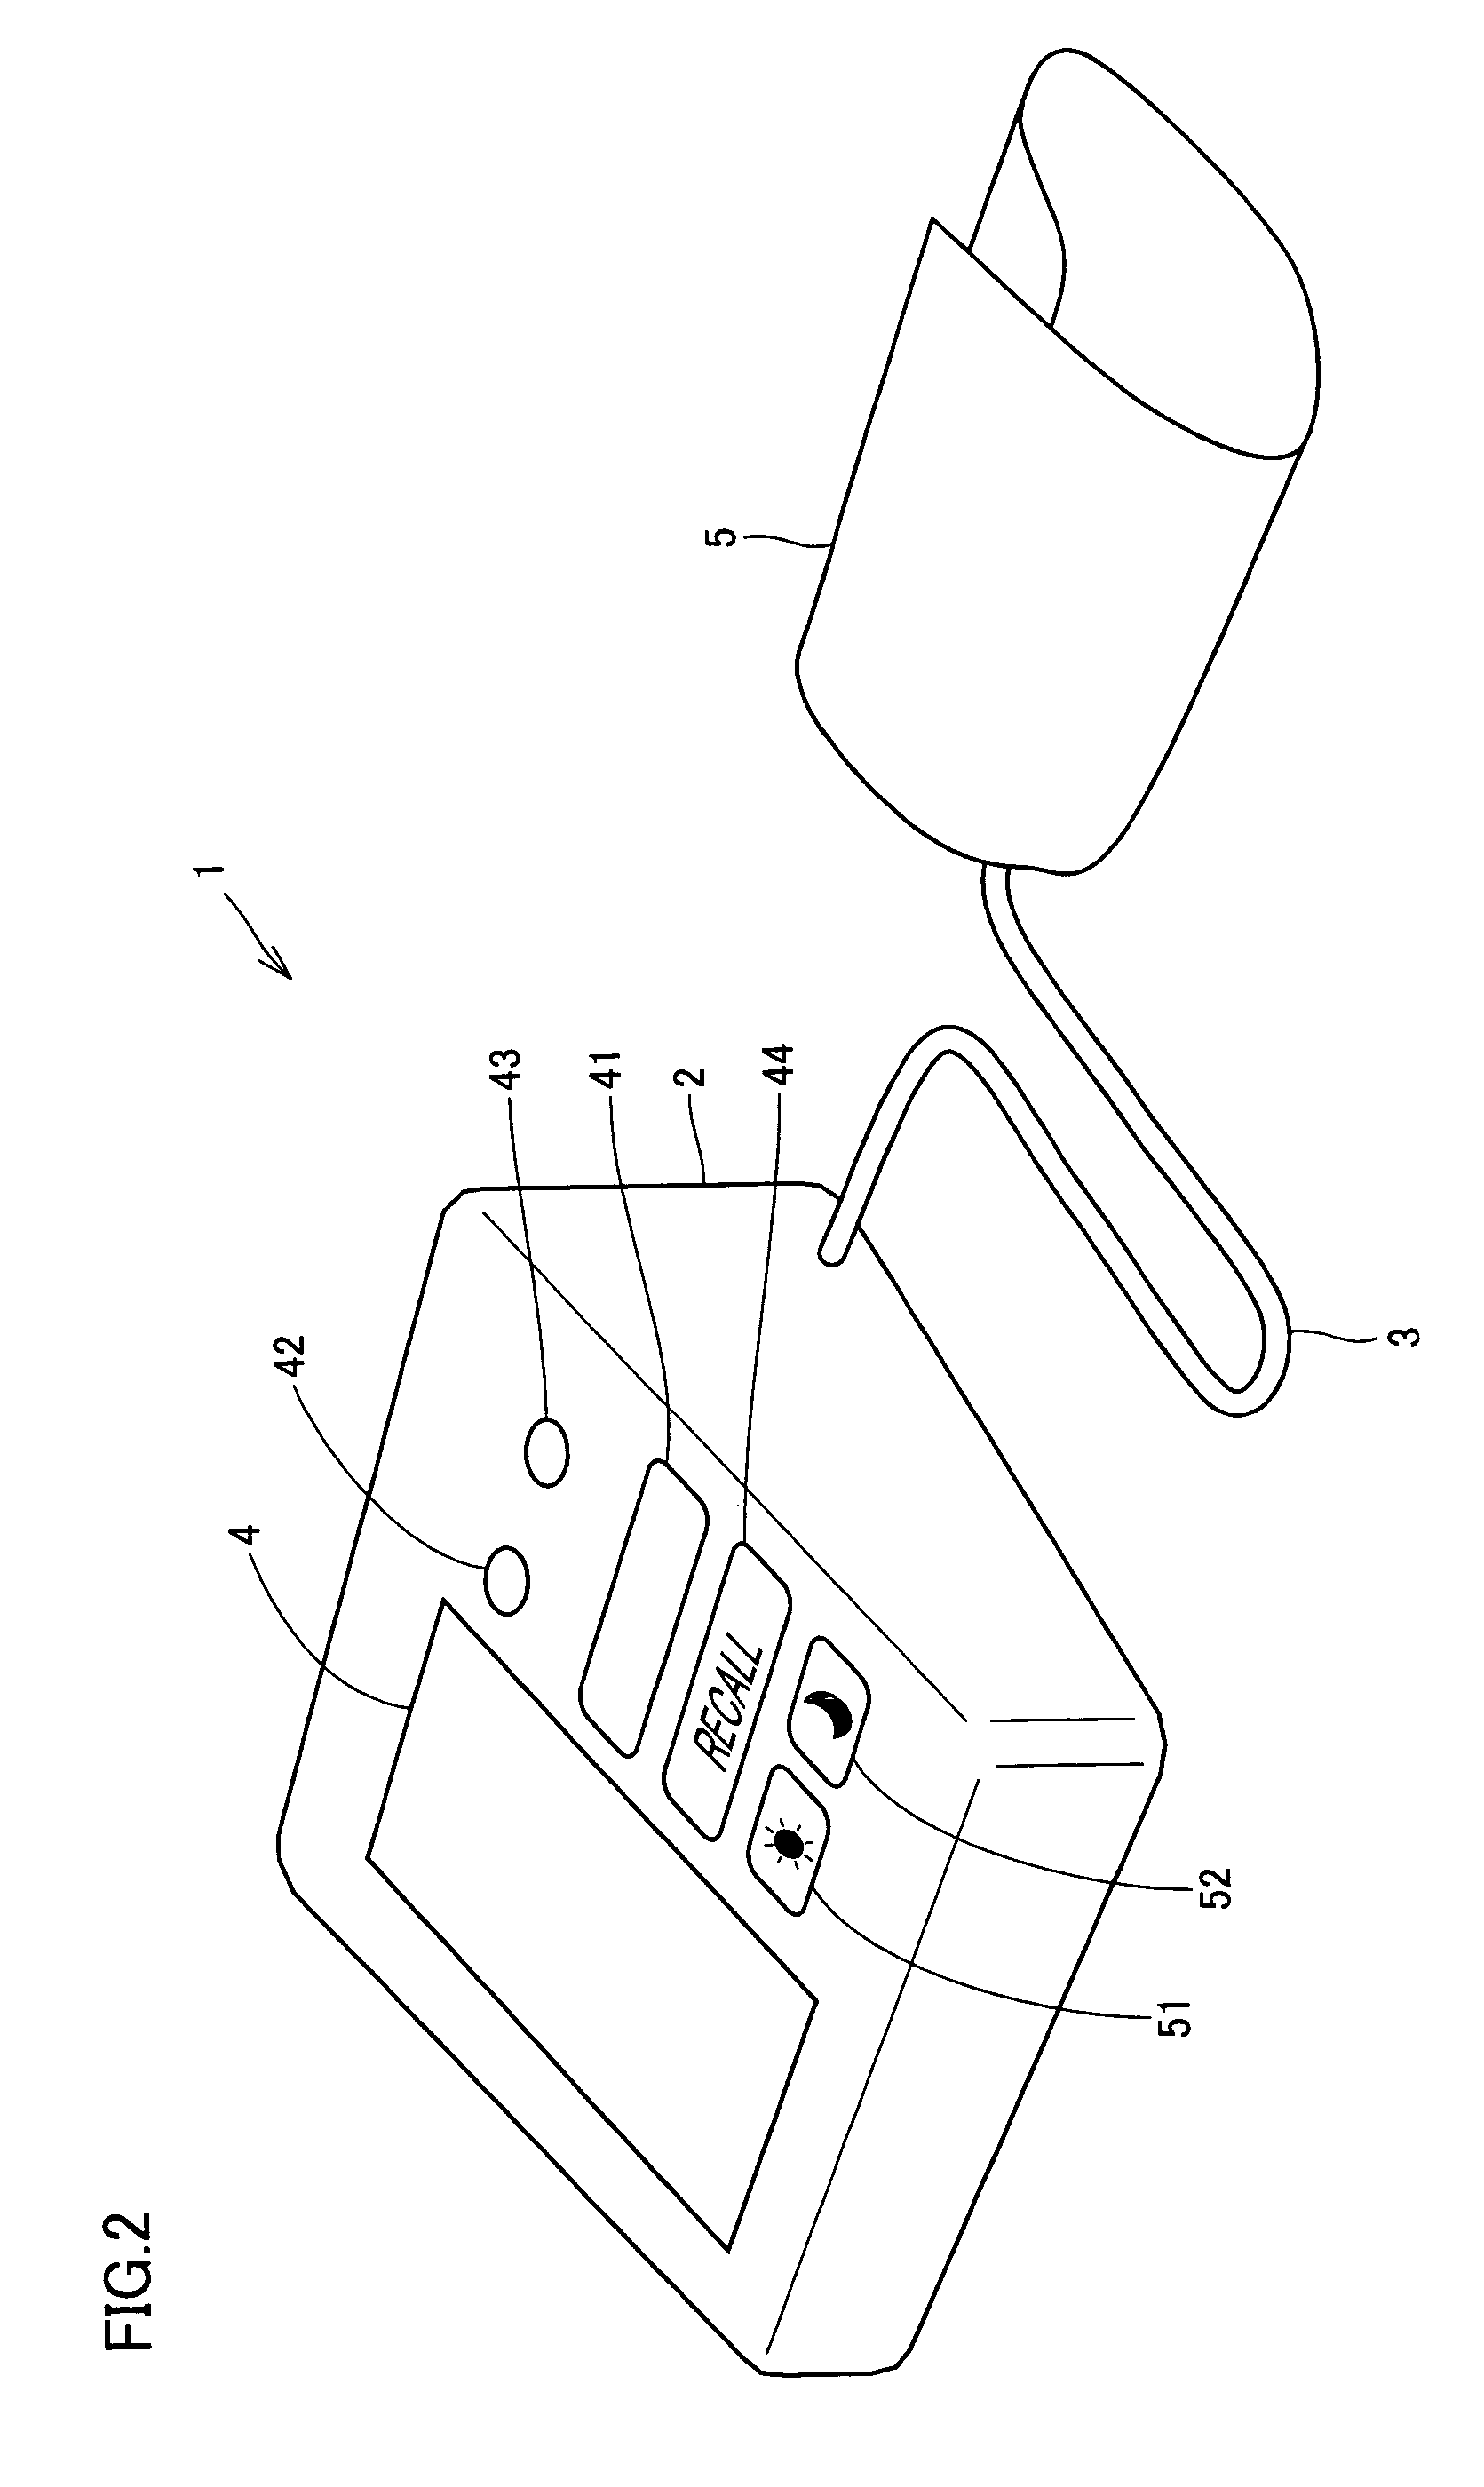 Electronic blood pressure monitor and data processing apparatus